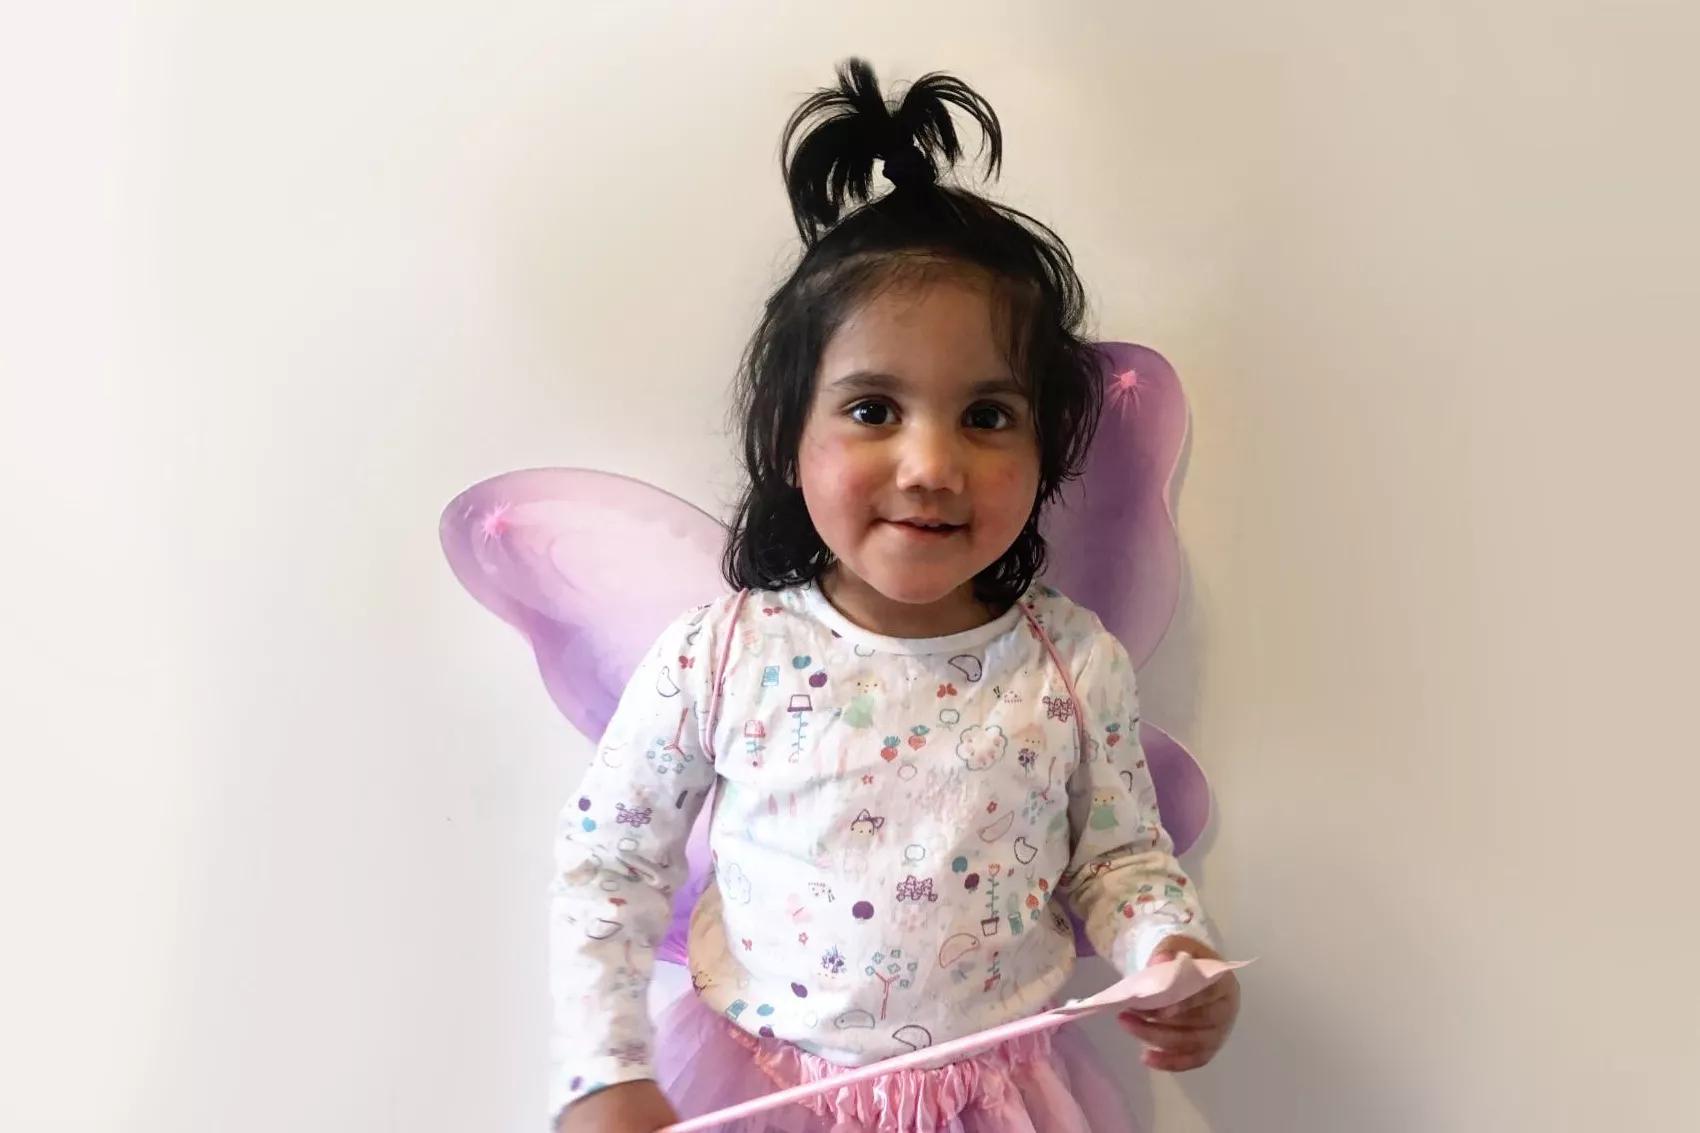 Shahera, from South London has been diagnosed with a very rare immunodeficiency disorder and needs to find a lifesaving stem cell donor.